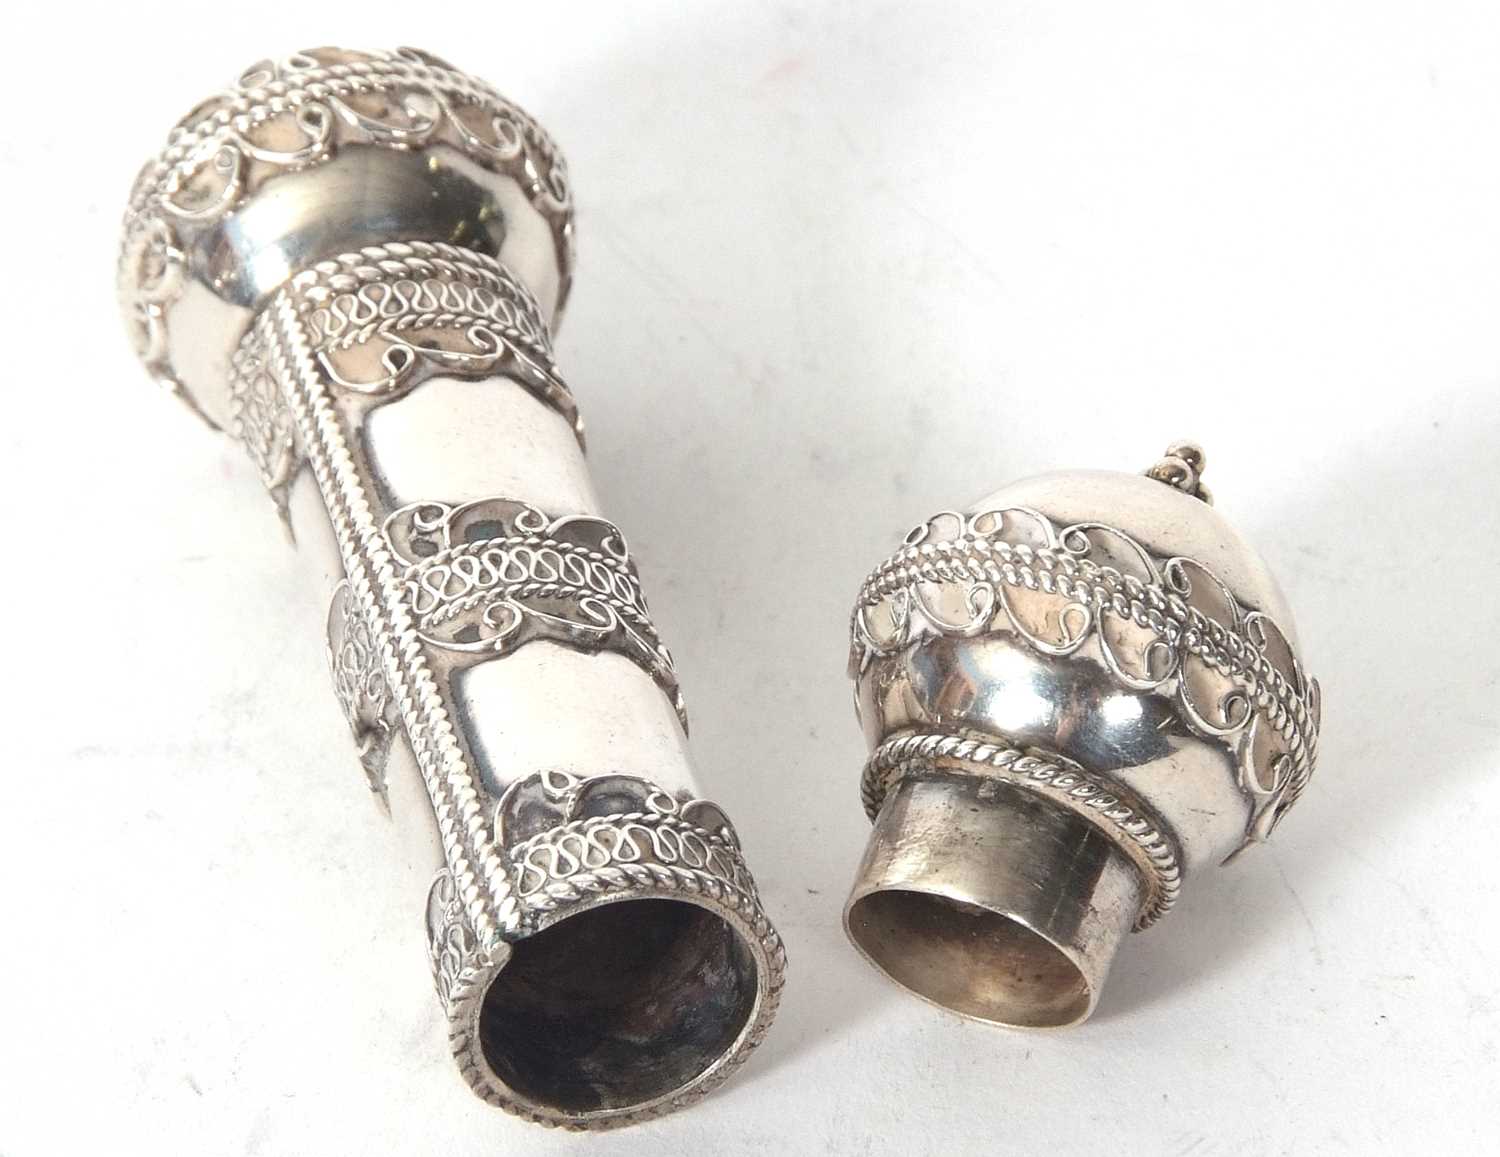 A Megillah scroll case, silver plated with bead and scroll design, 10cm long - Image 2 of 2